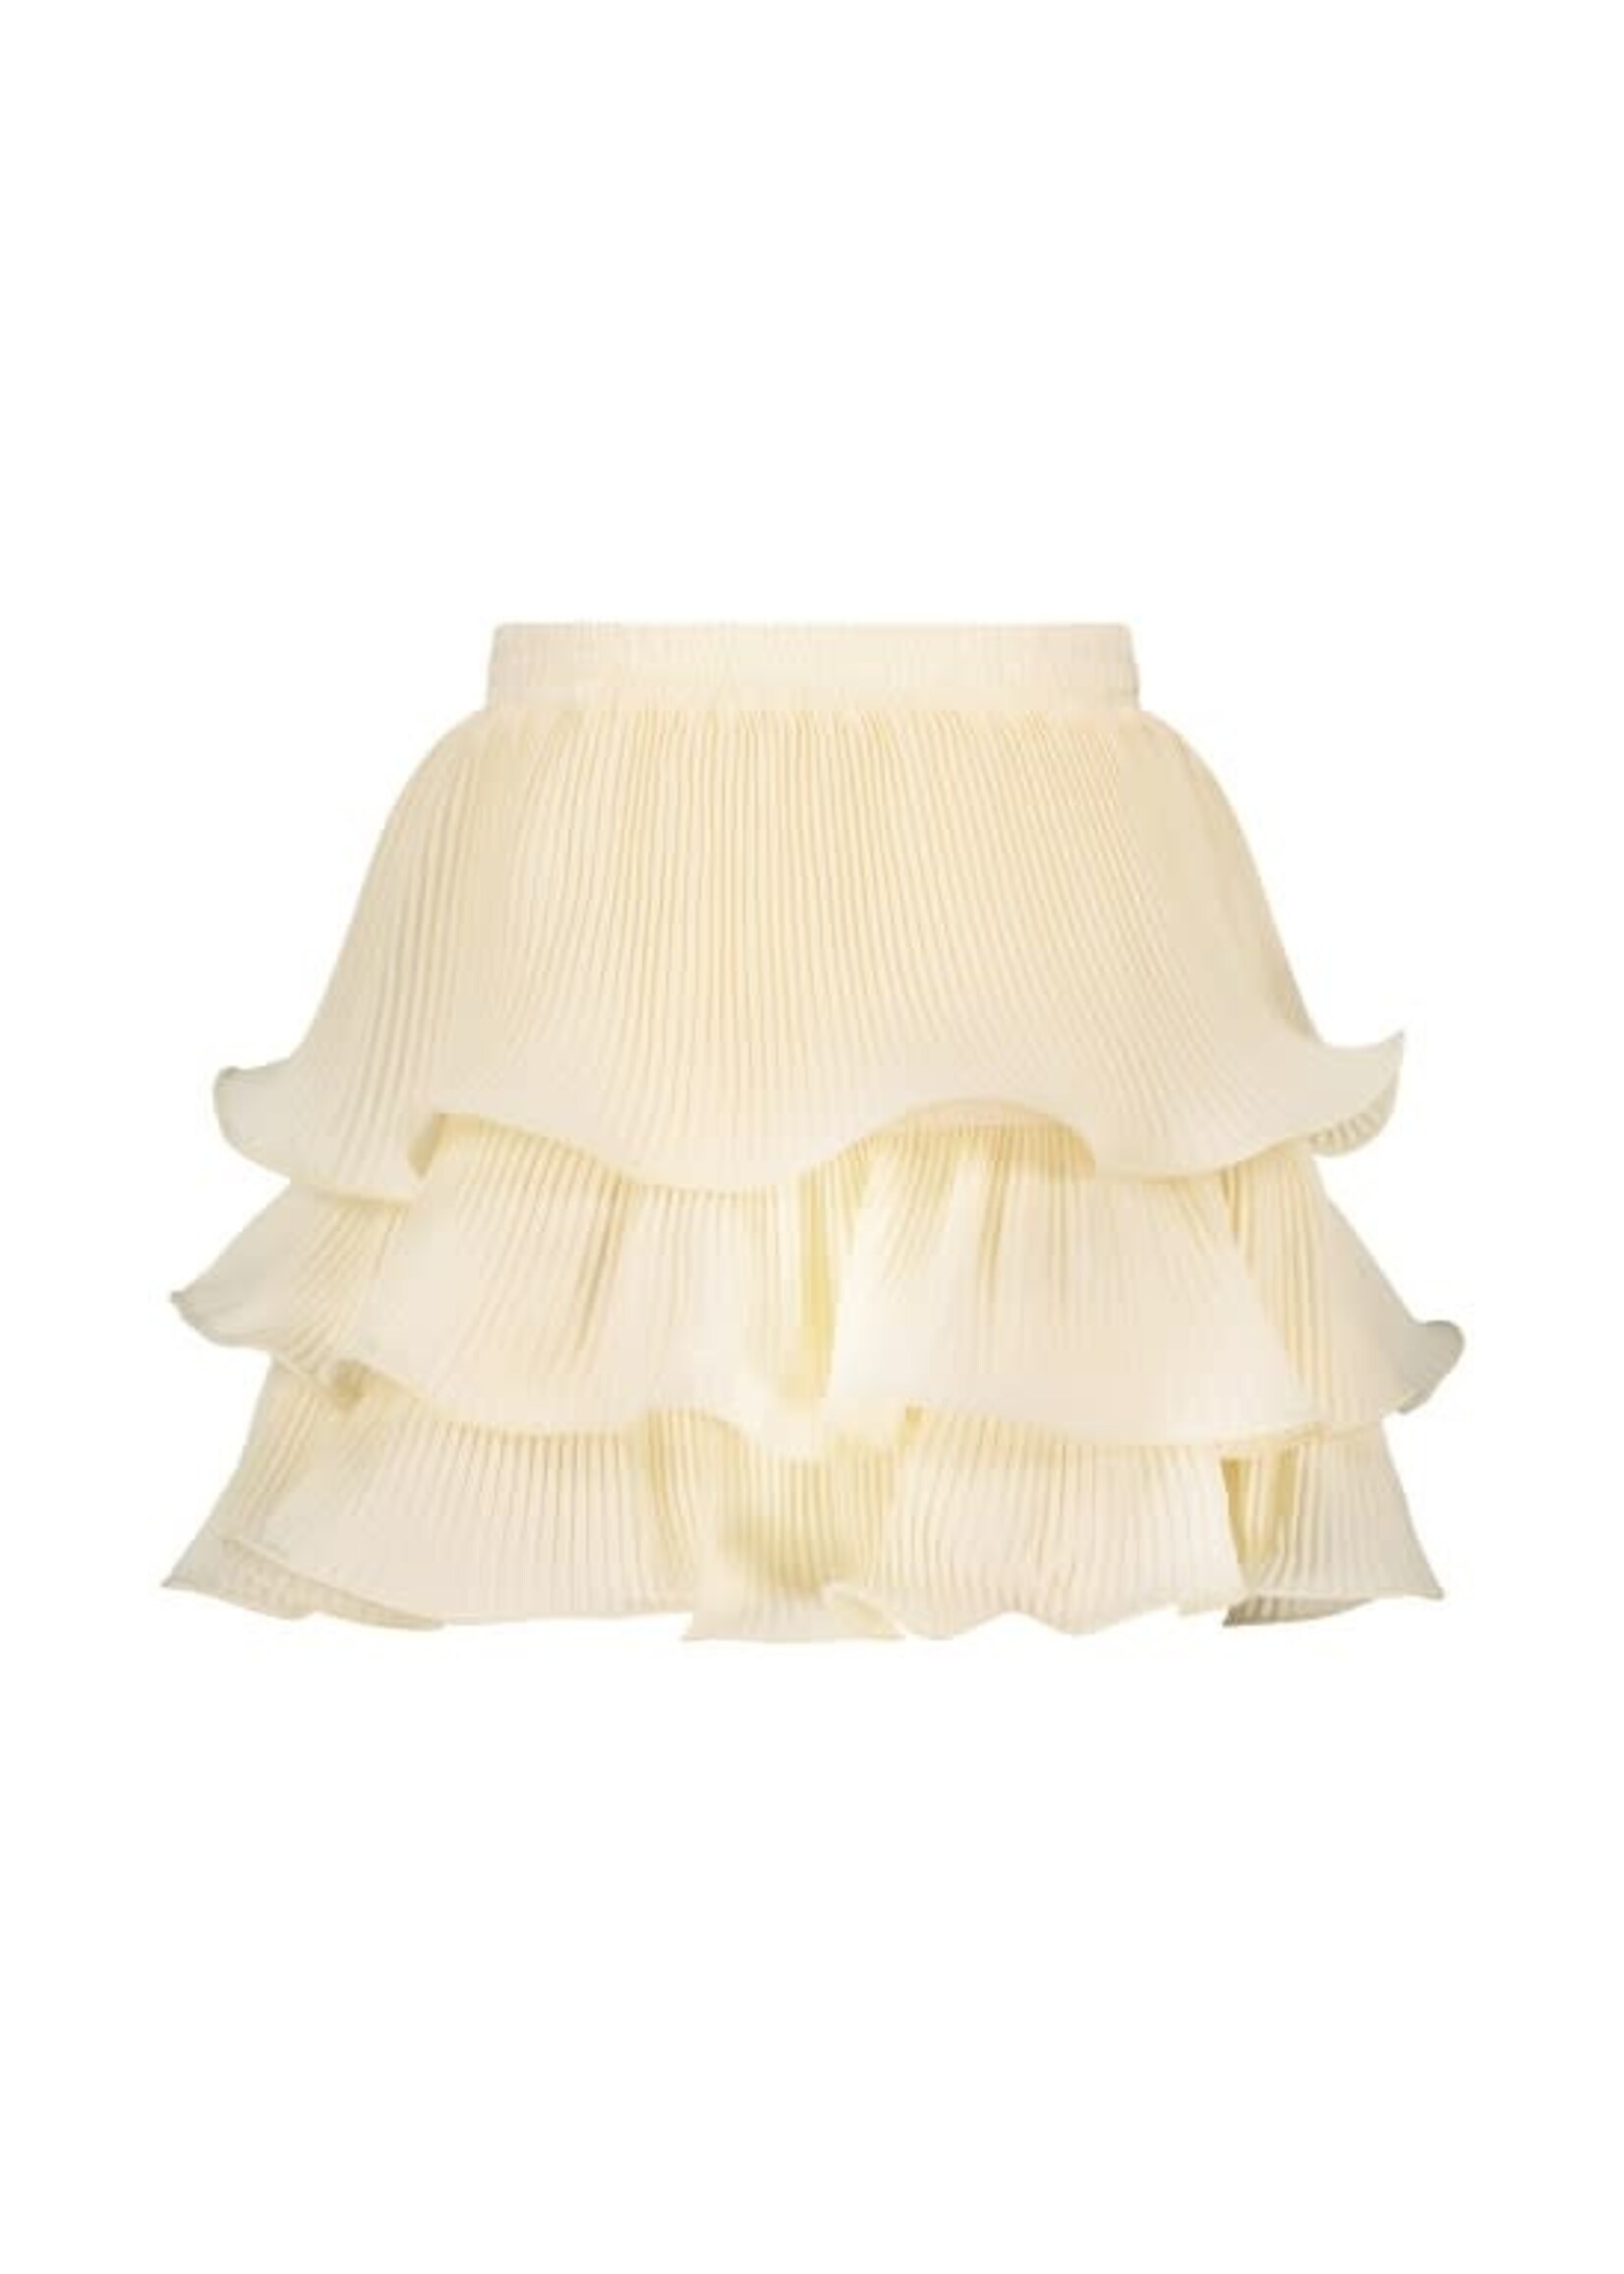 Le Chic Le Chic TESRA plisée skirt C312-5730 Pearled Ivory